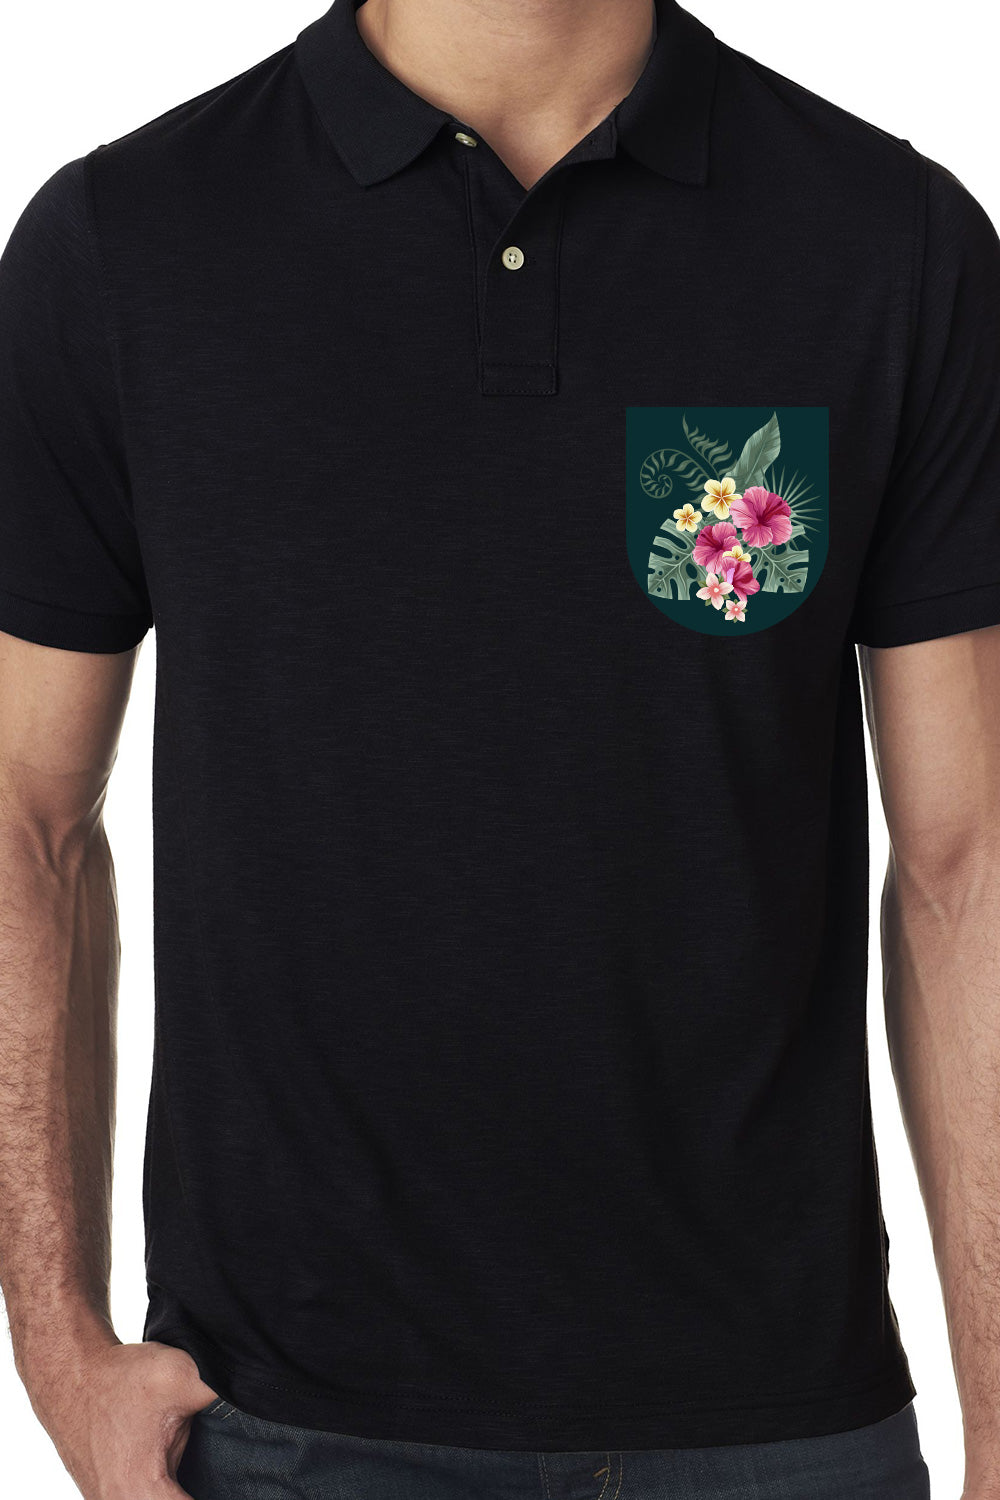 Black Premium Polo T-Shirt with Tropical Grunge Graphics on Pocket Printed